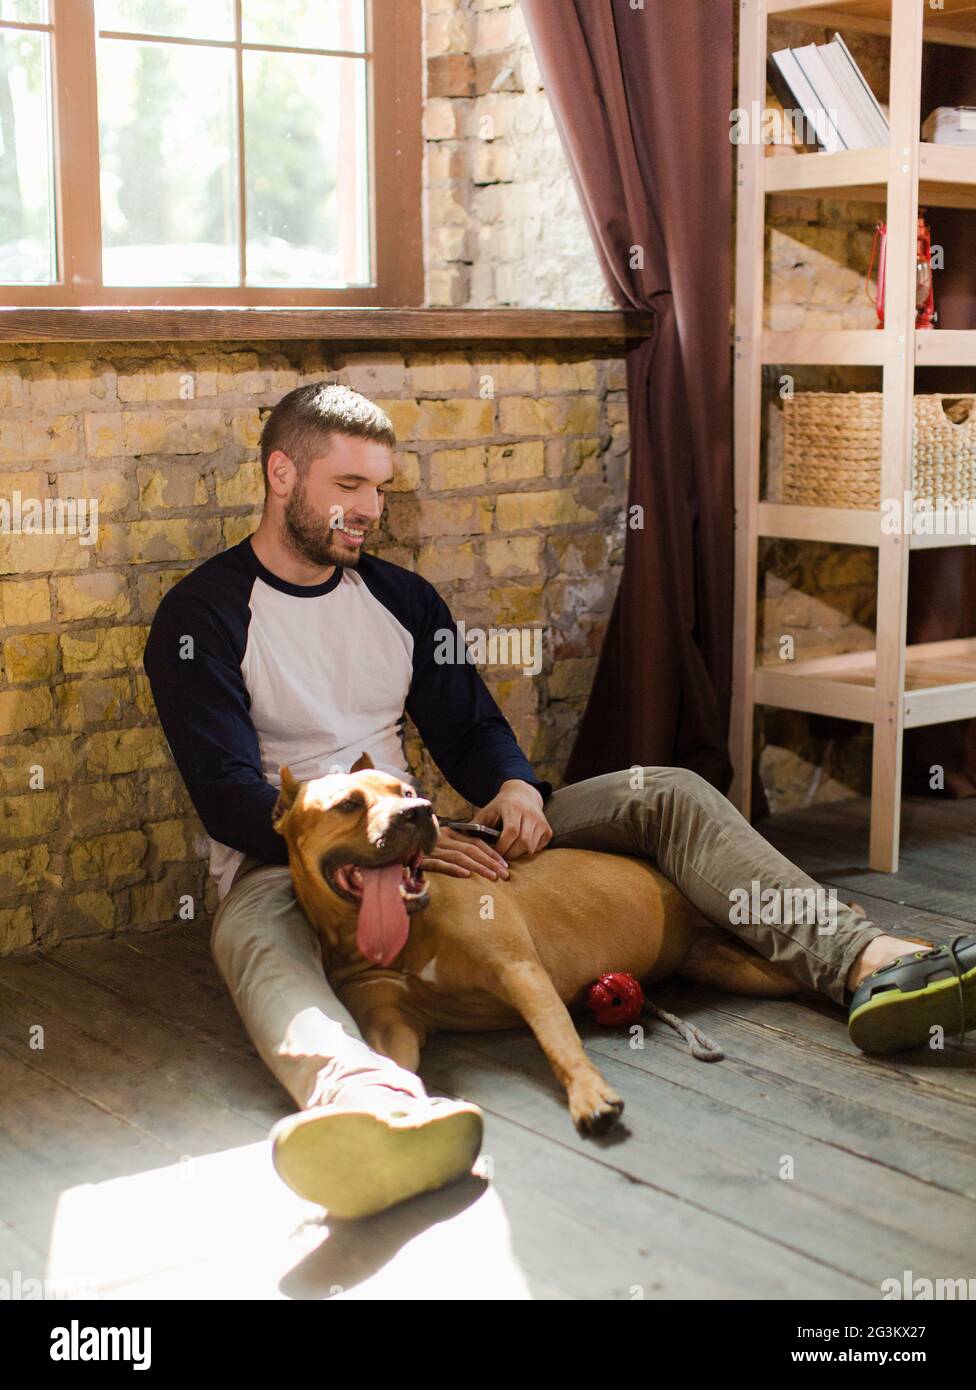 View of young sportive man having fun with dog at home. Stock Photo